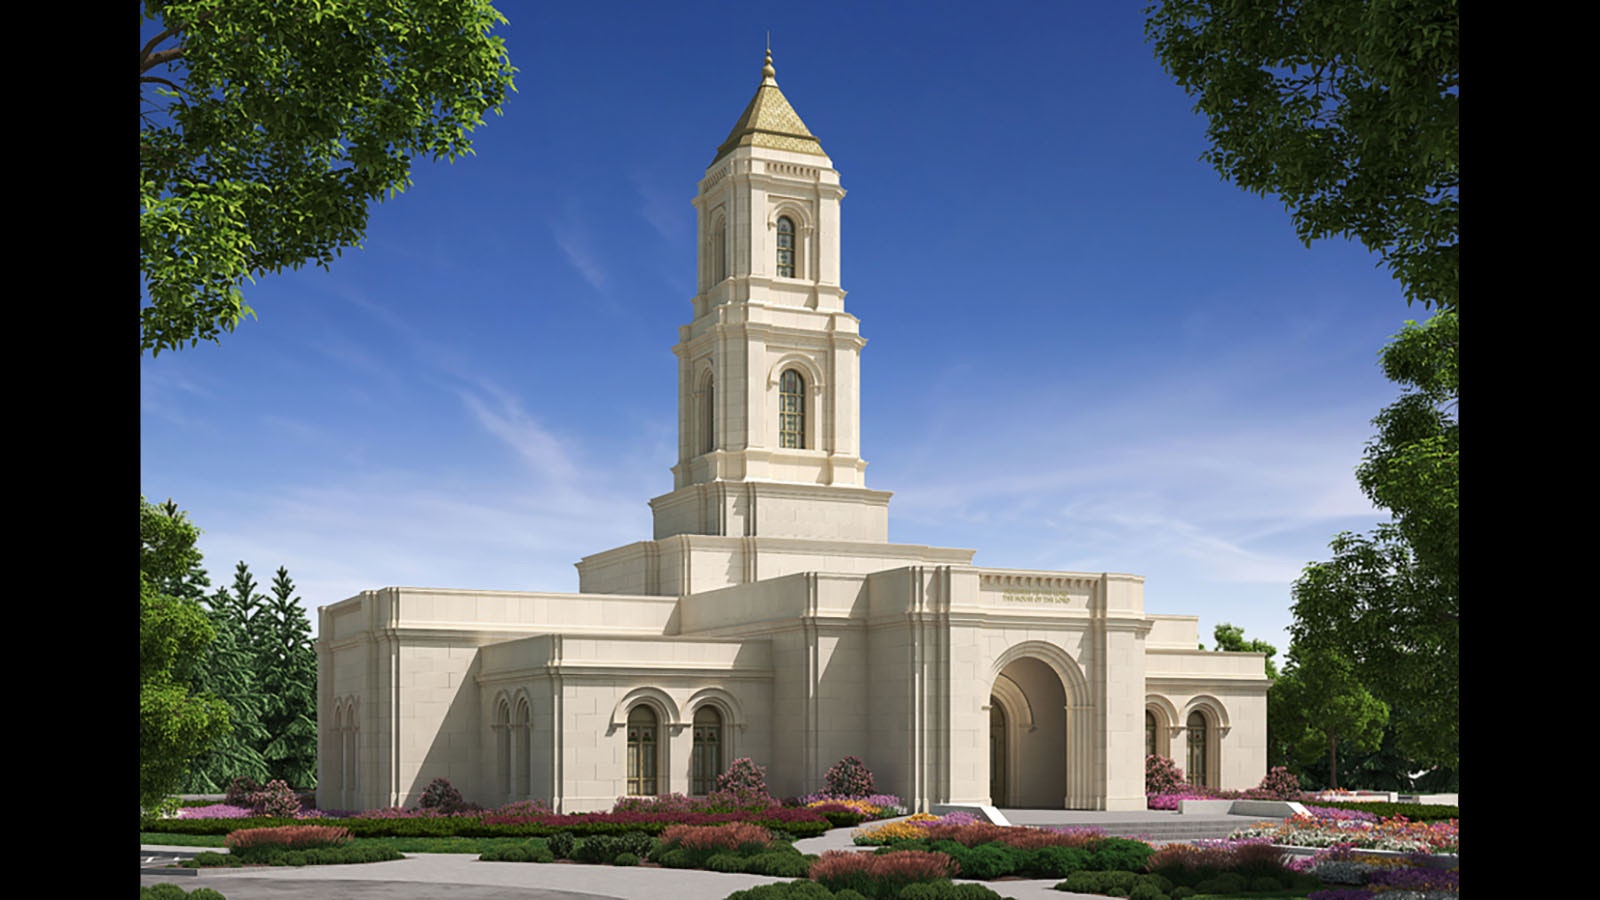 An artist's rendering of what the proposed Cody Wyoming Temple would look like.